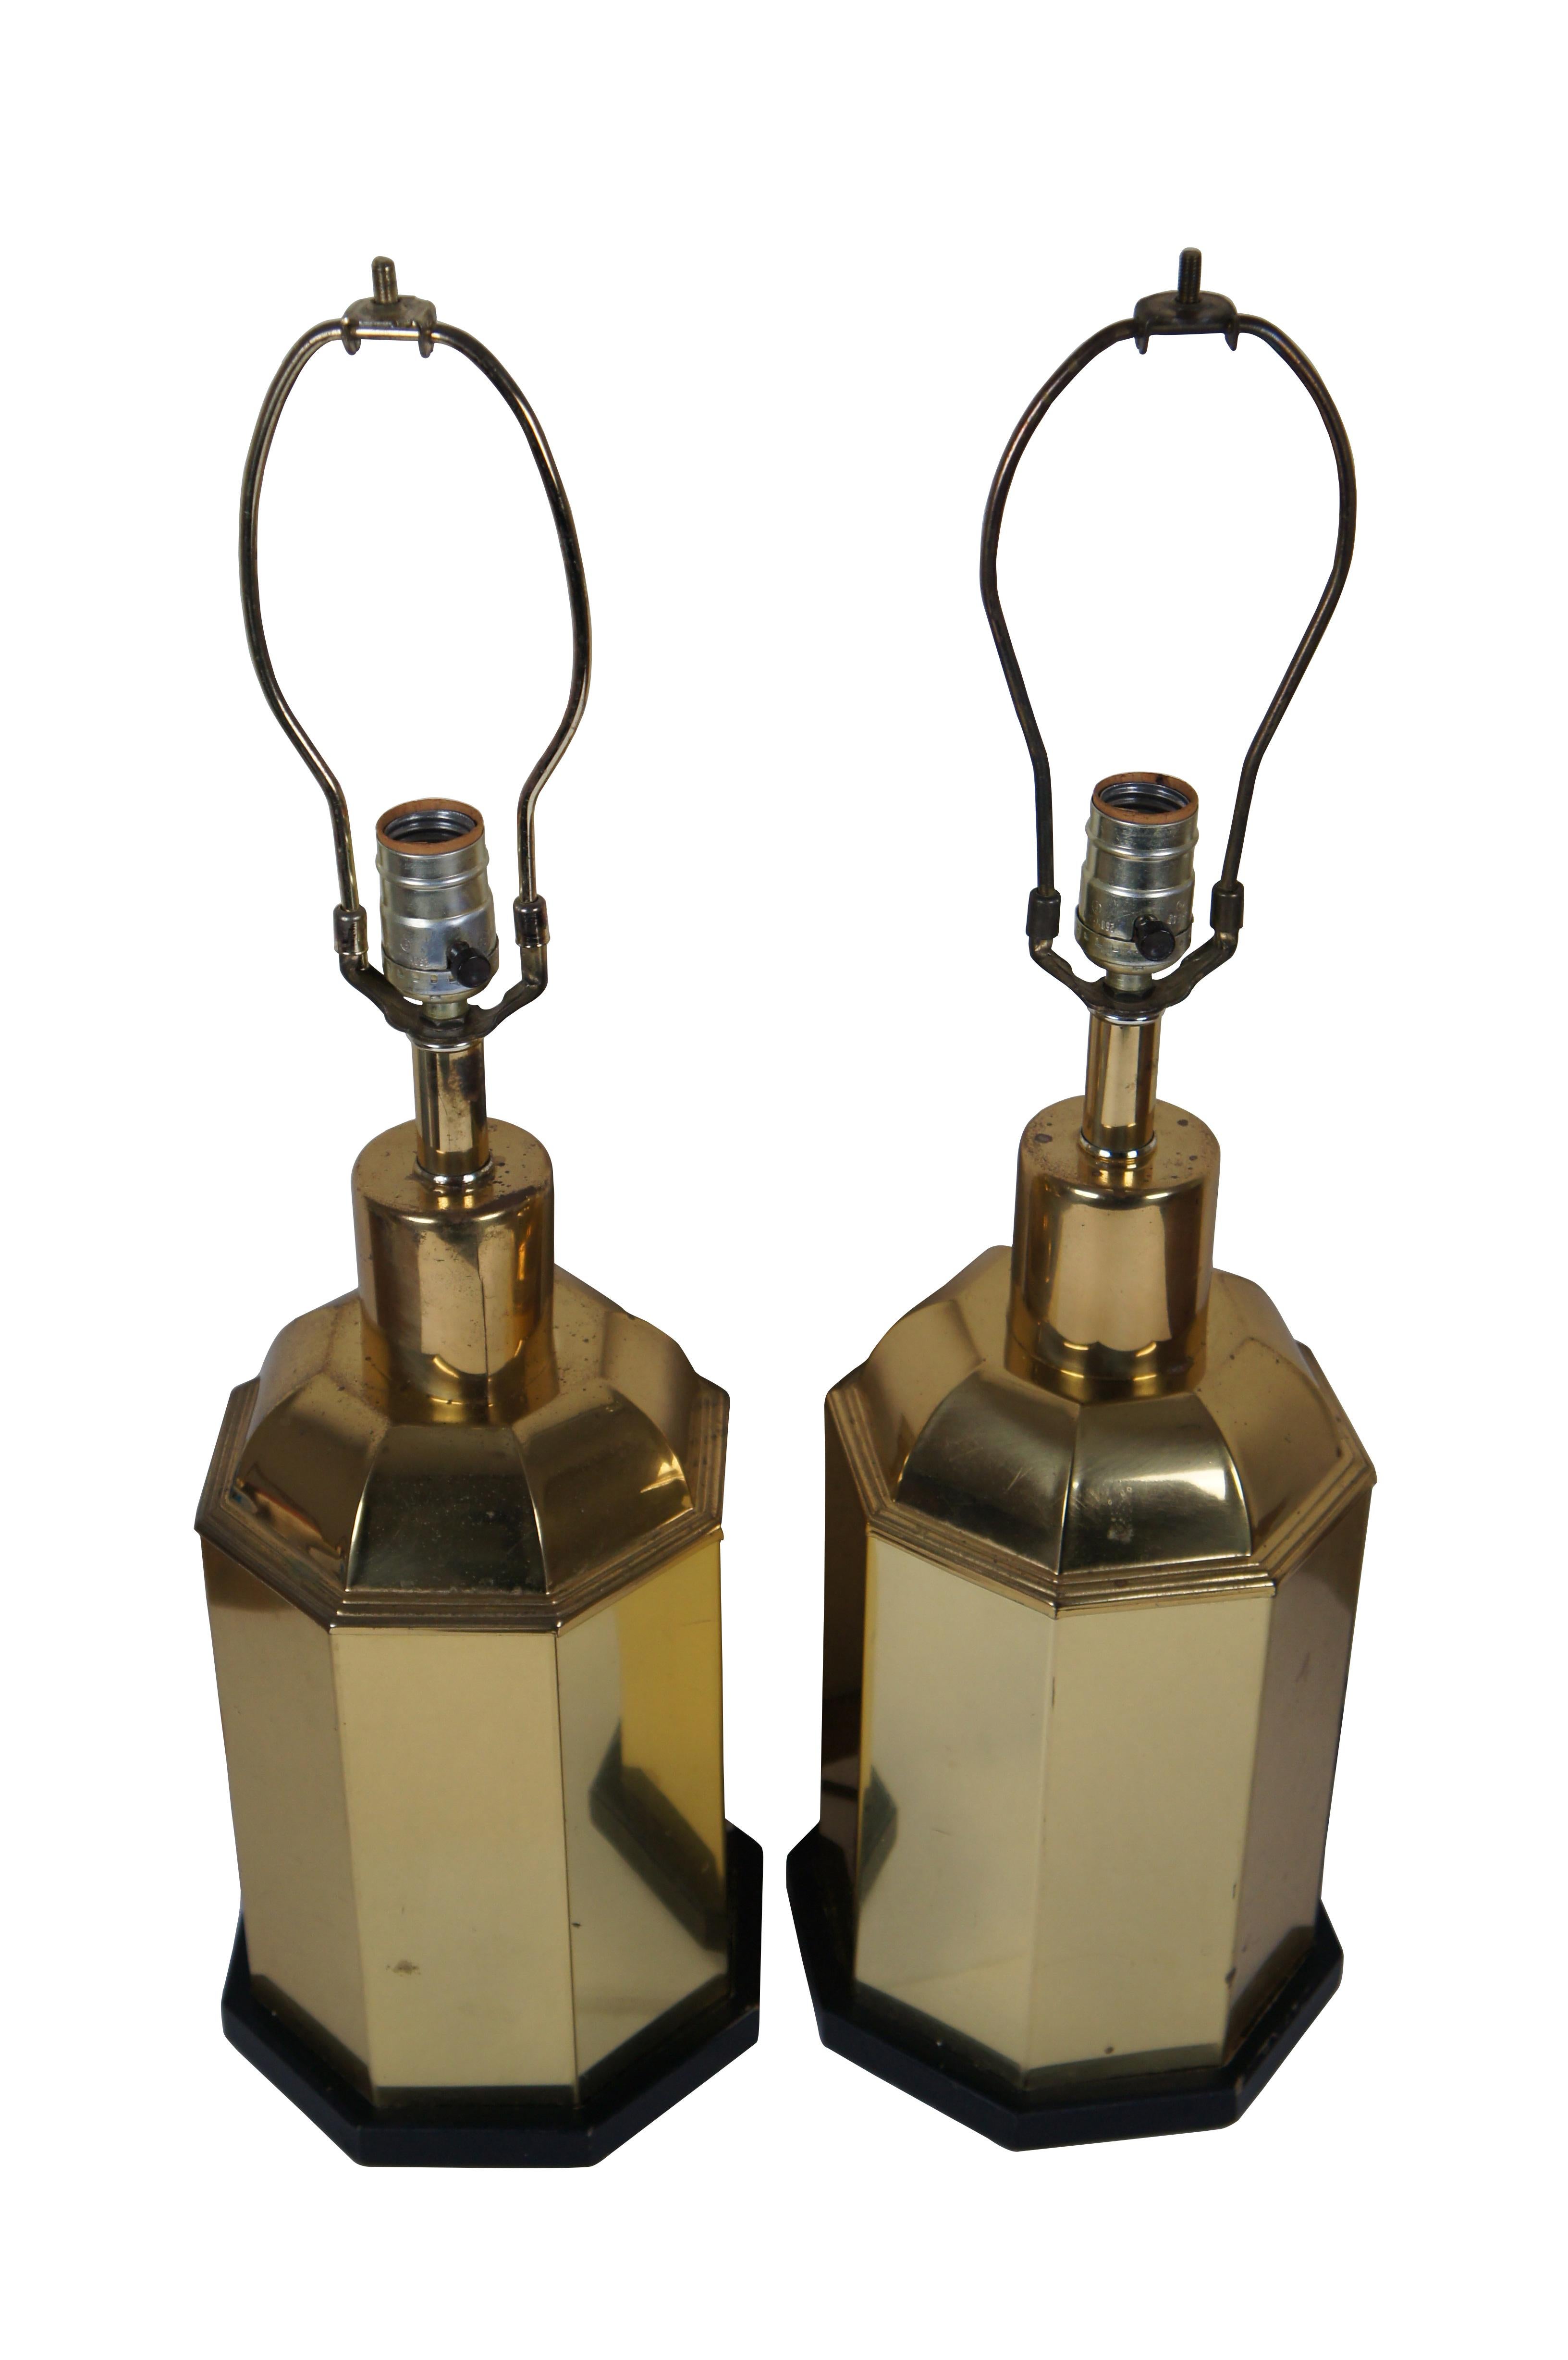 Pair of late 20th century Hollywood Regency / Chinoiserie octagonal brass tea caddy / canister shaped table lamps with black wood bases. 

Dimensions:
8.25